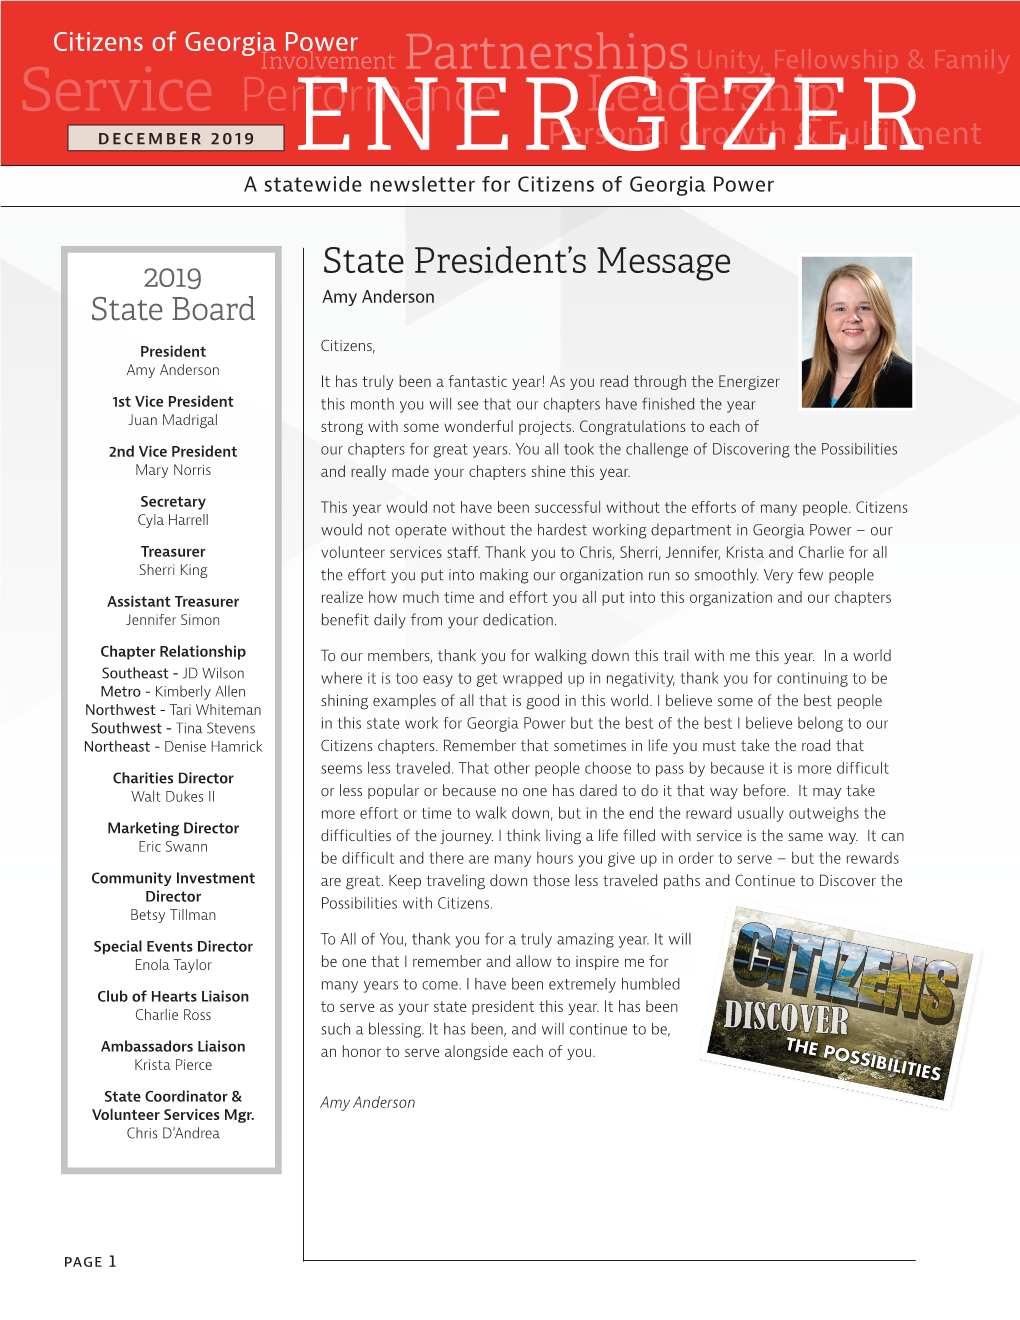 State President's Message